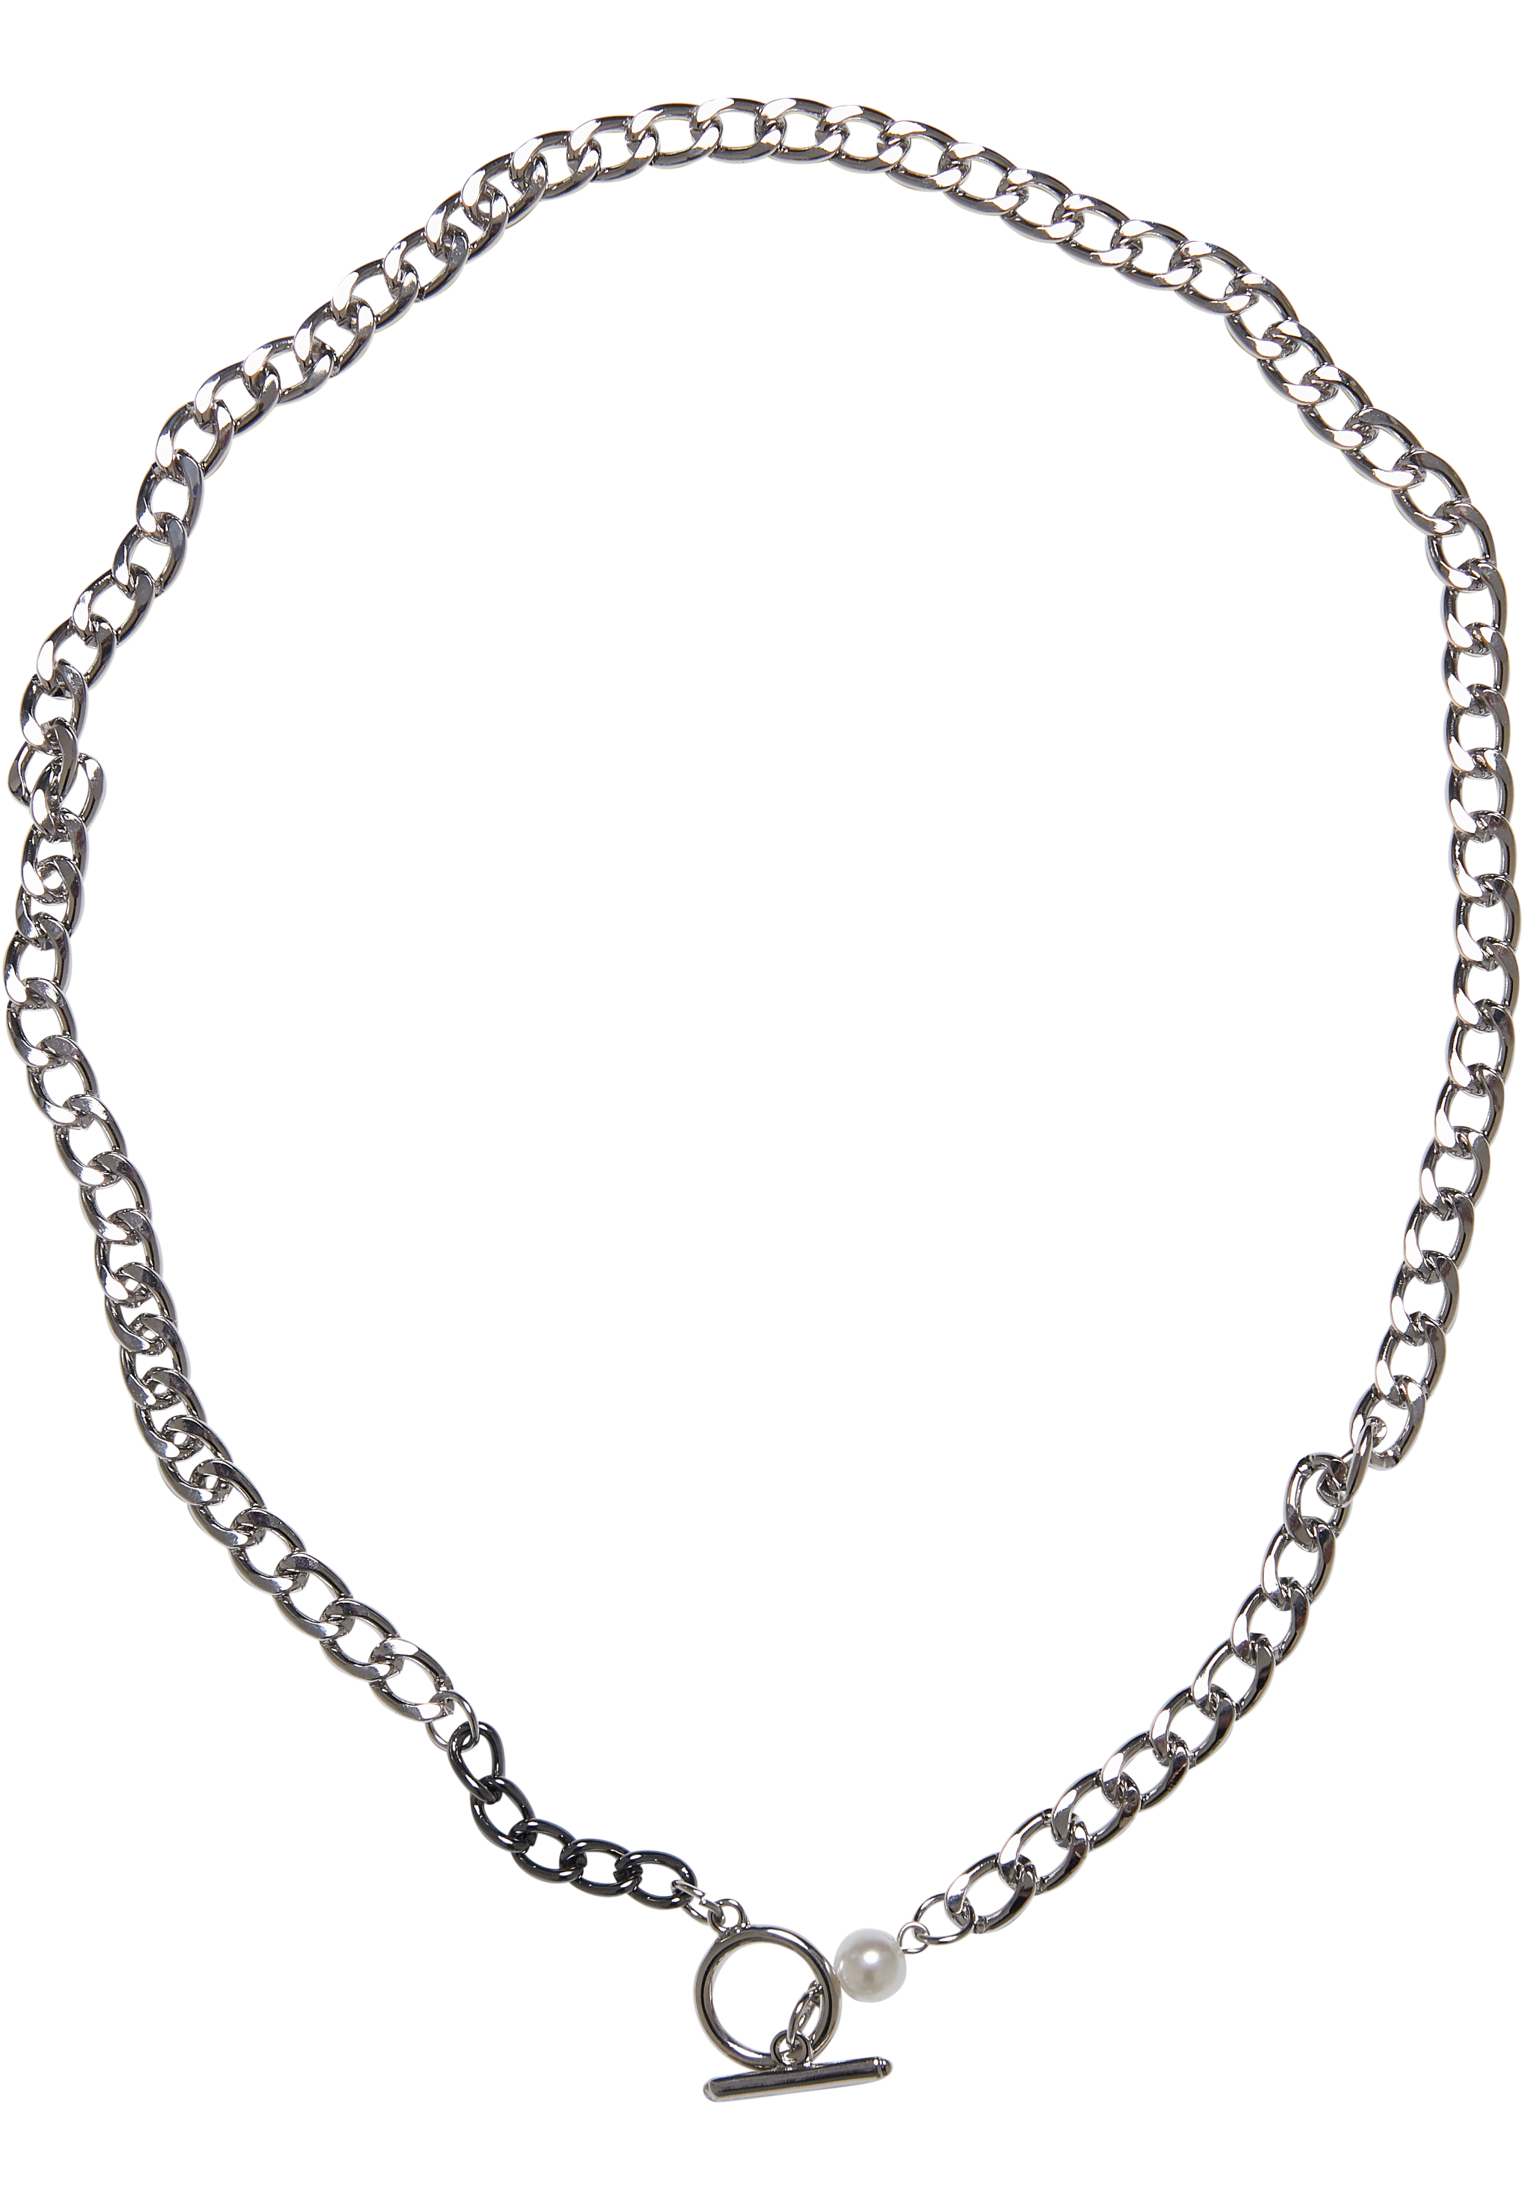 Pearl necklace - silver colors